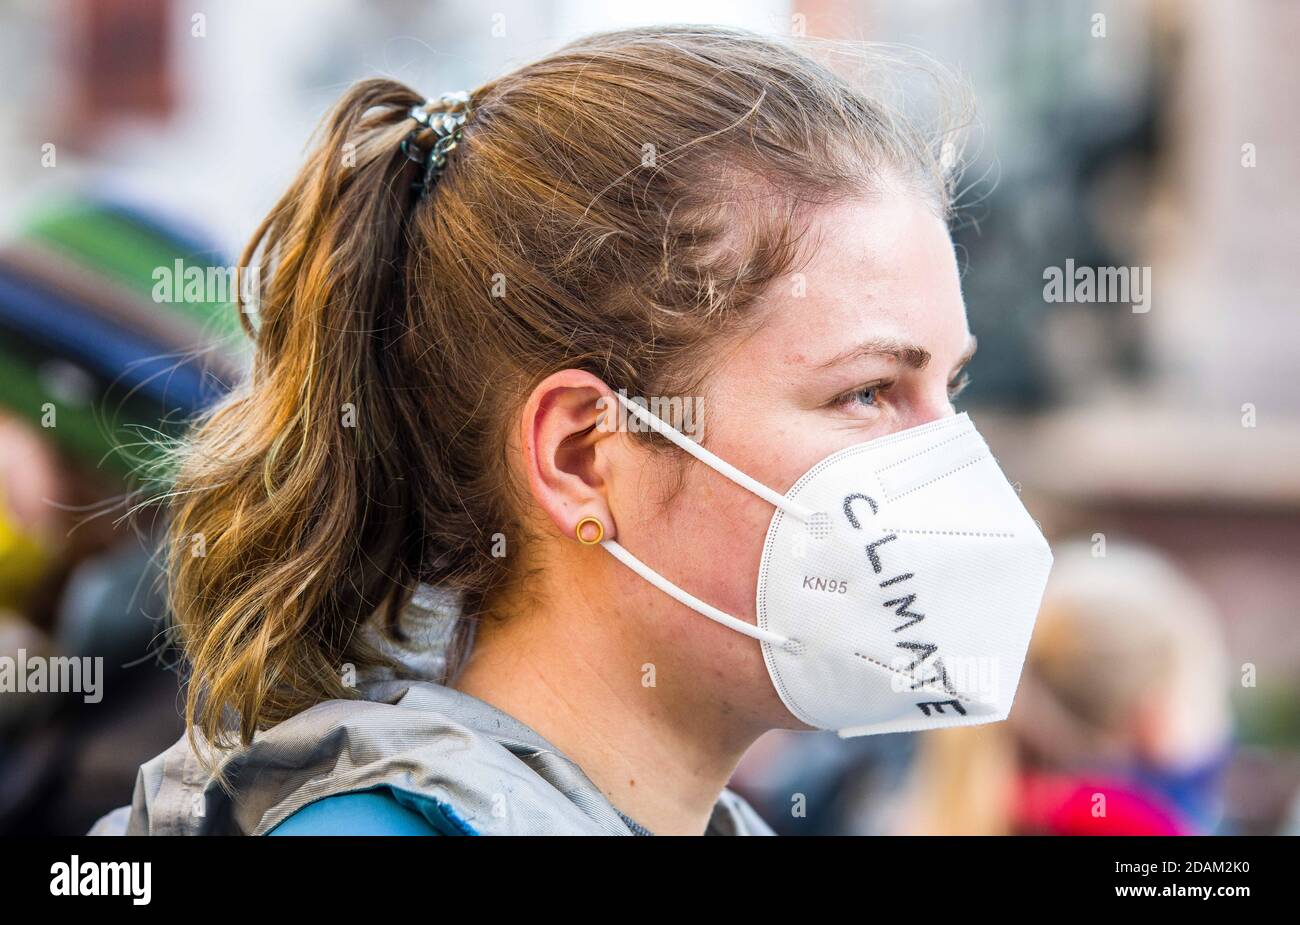 Munich, Bavaria, Germany. 13th Nov, 2020. A Fridays for Future demonstrator has the word ''climate'' written on her mask. Fridays for Future Germany has returned to the streets during the second wave of Coronavirus to protest against the clearing of the DannenrodÂ Forest (DannenrÃ¶derÂ Forst). The demonstrators marched from Marienplatz to the Green Party offices where three protestors climbed a tree a hung a banner which eventually resulted in a police response that was initially peacefully resolved until unidentified plainclothes officers attempted an apprehension without identifying them Stock Photo